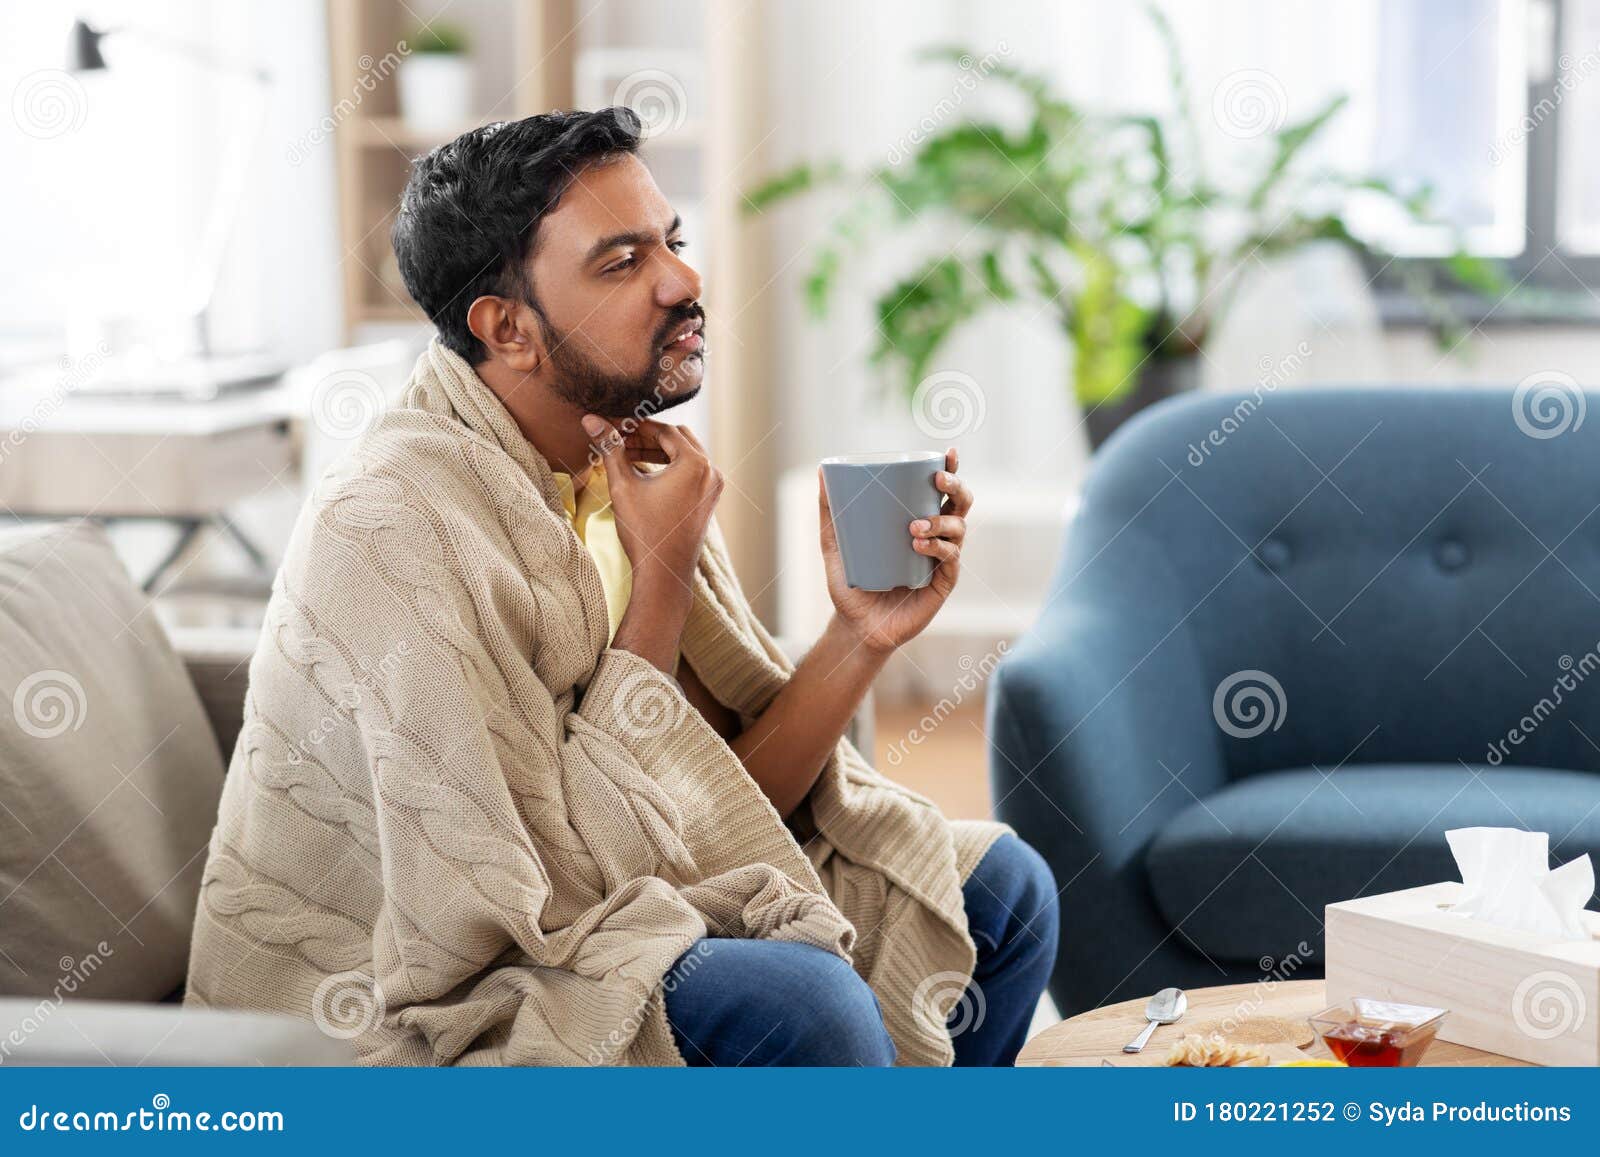 sick man with tea touching his sore throat at home